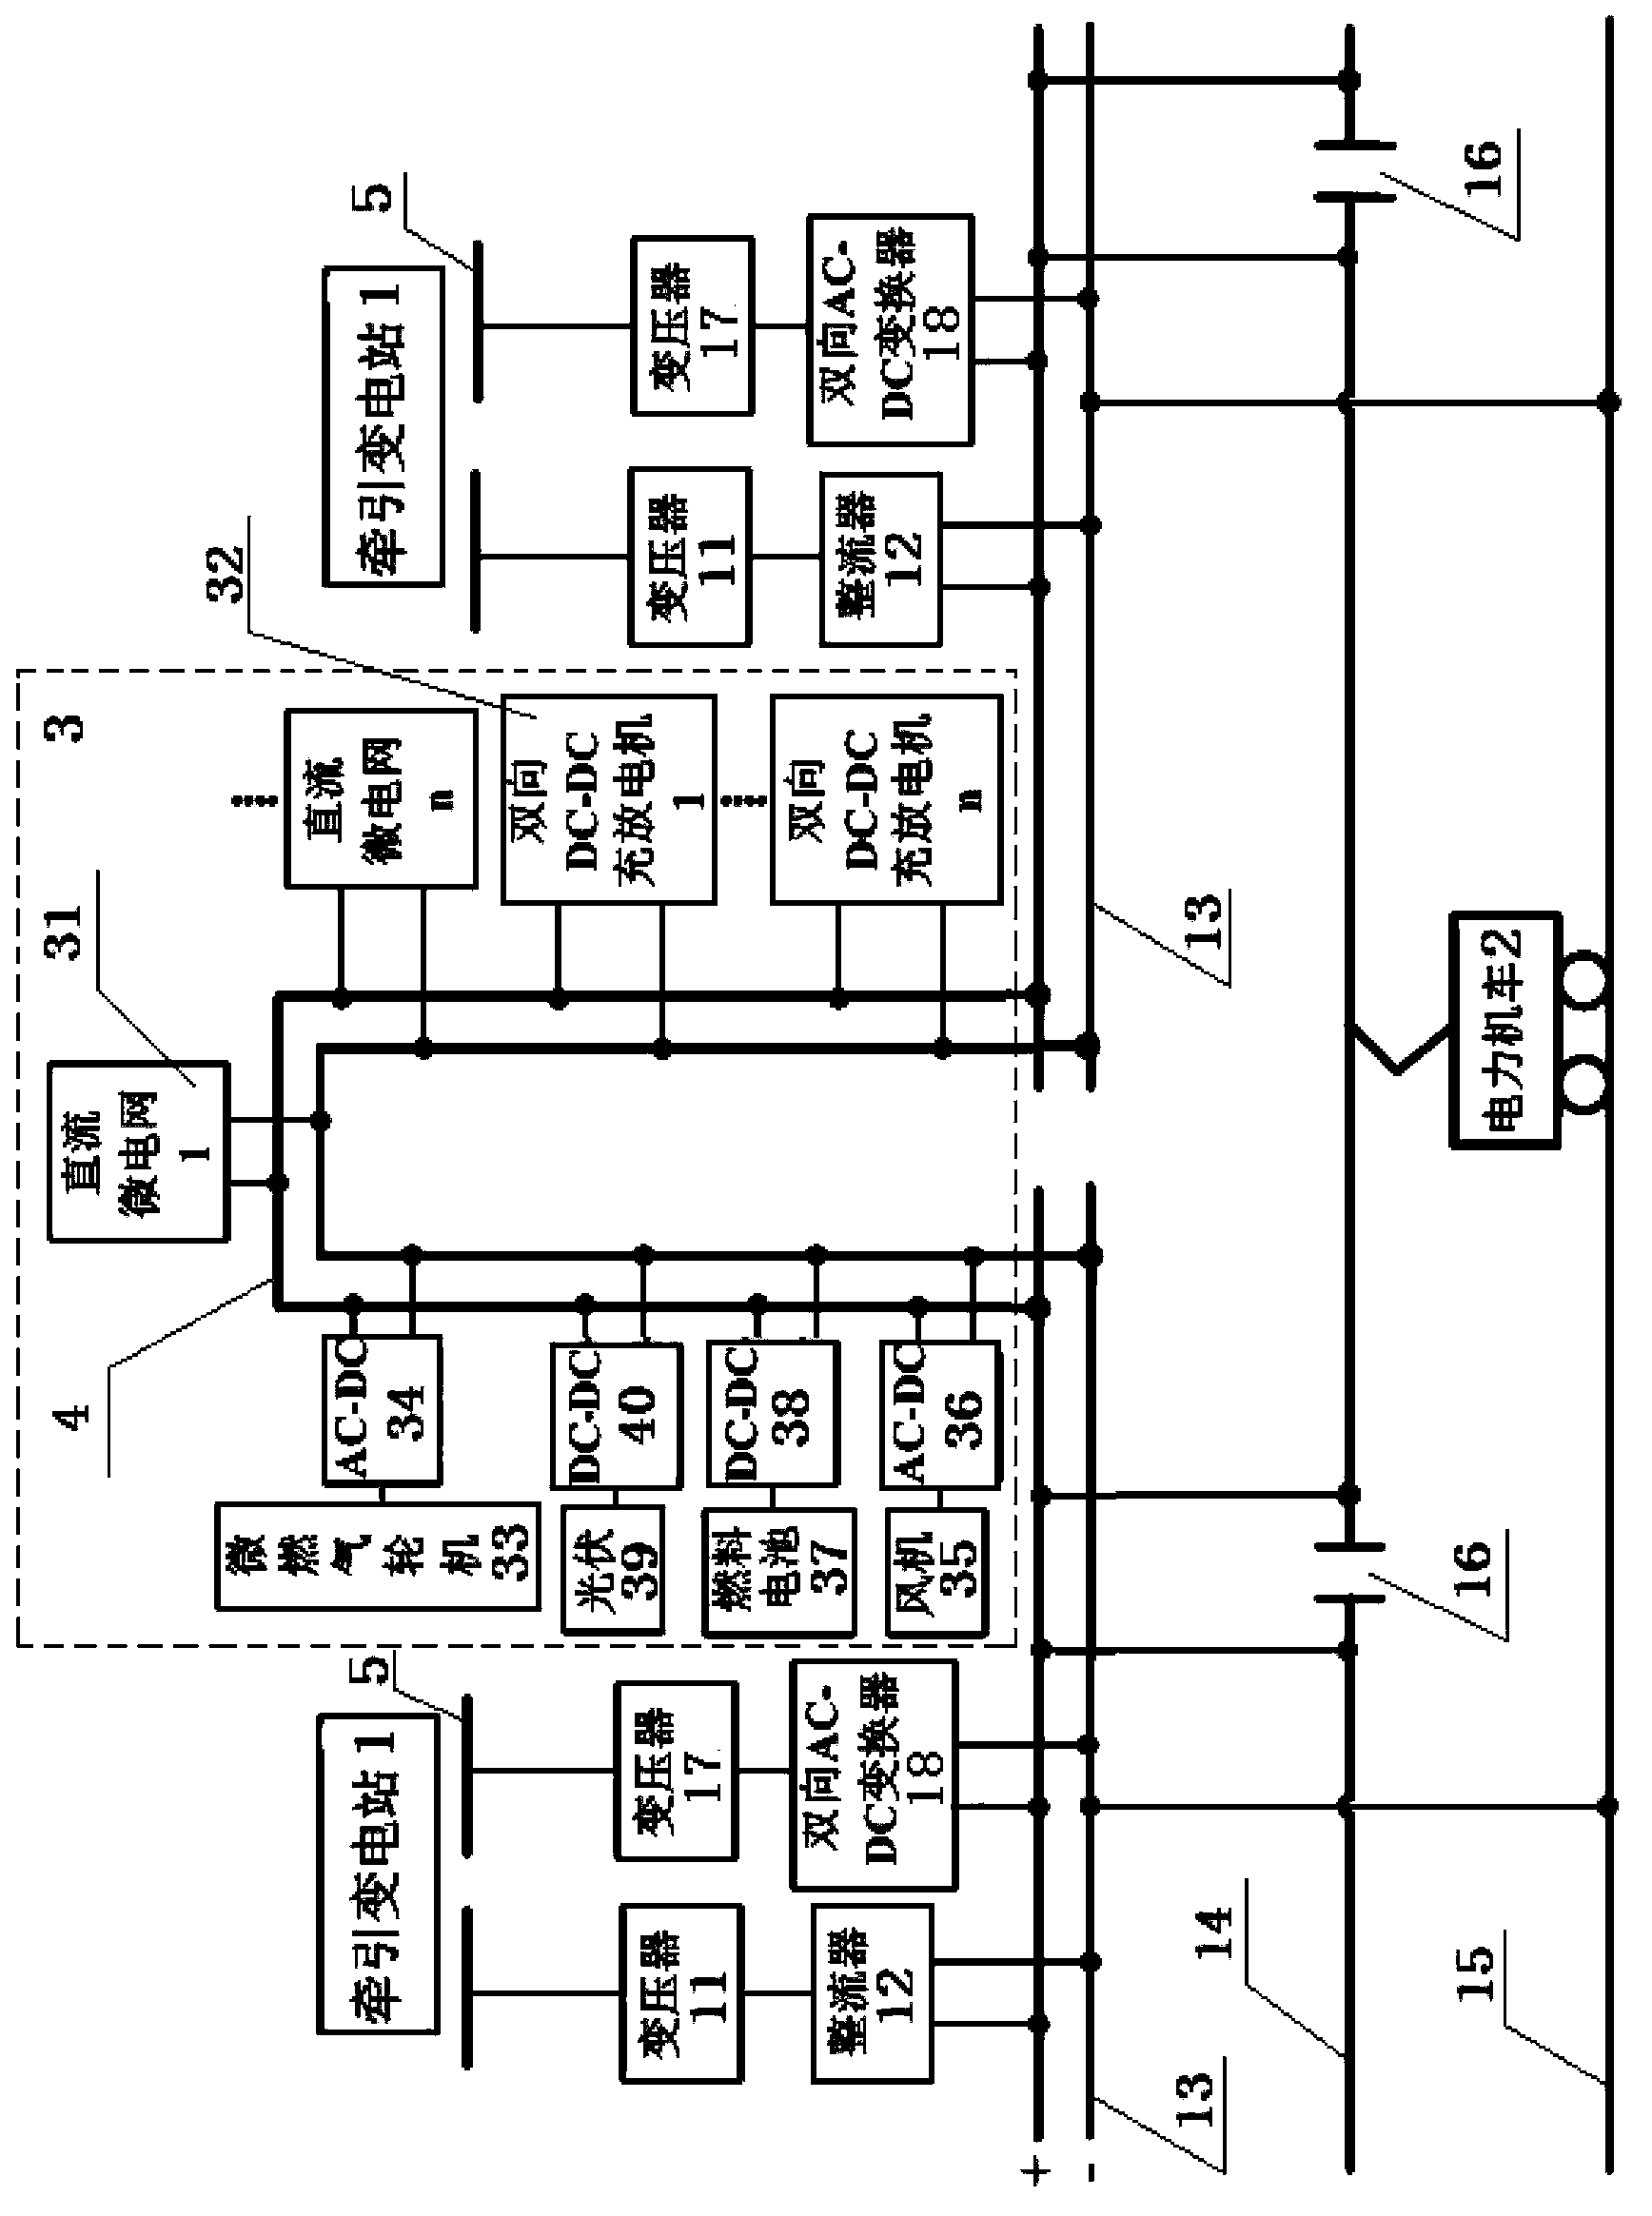 High-voltage direct-current tractive power supply system of bidirectional interactive electrified railway